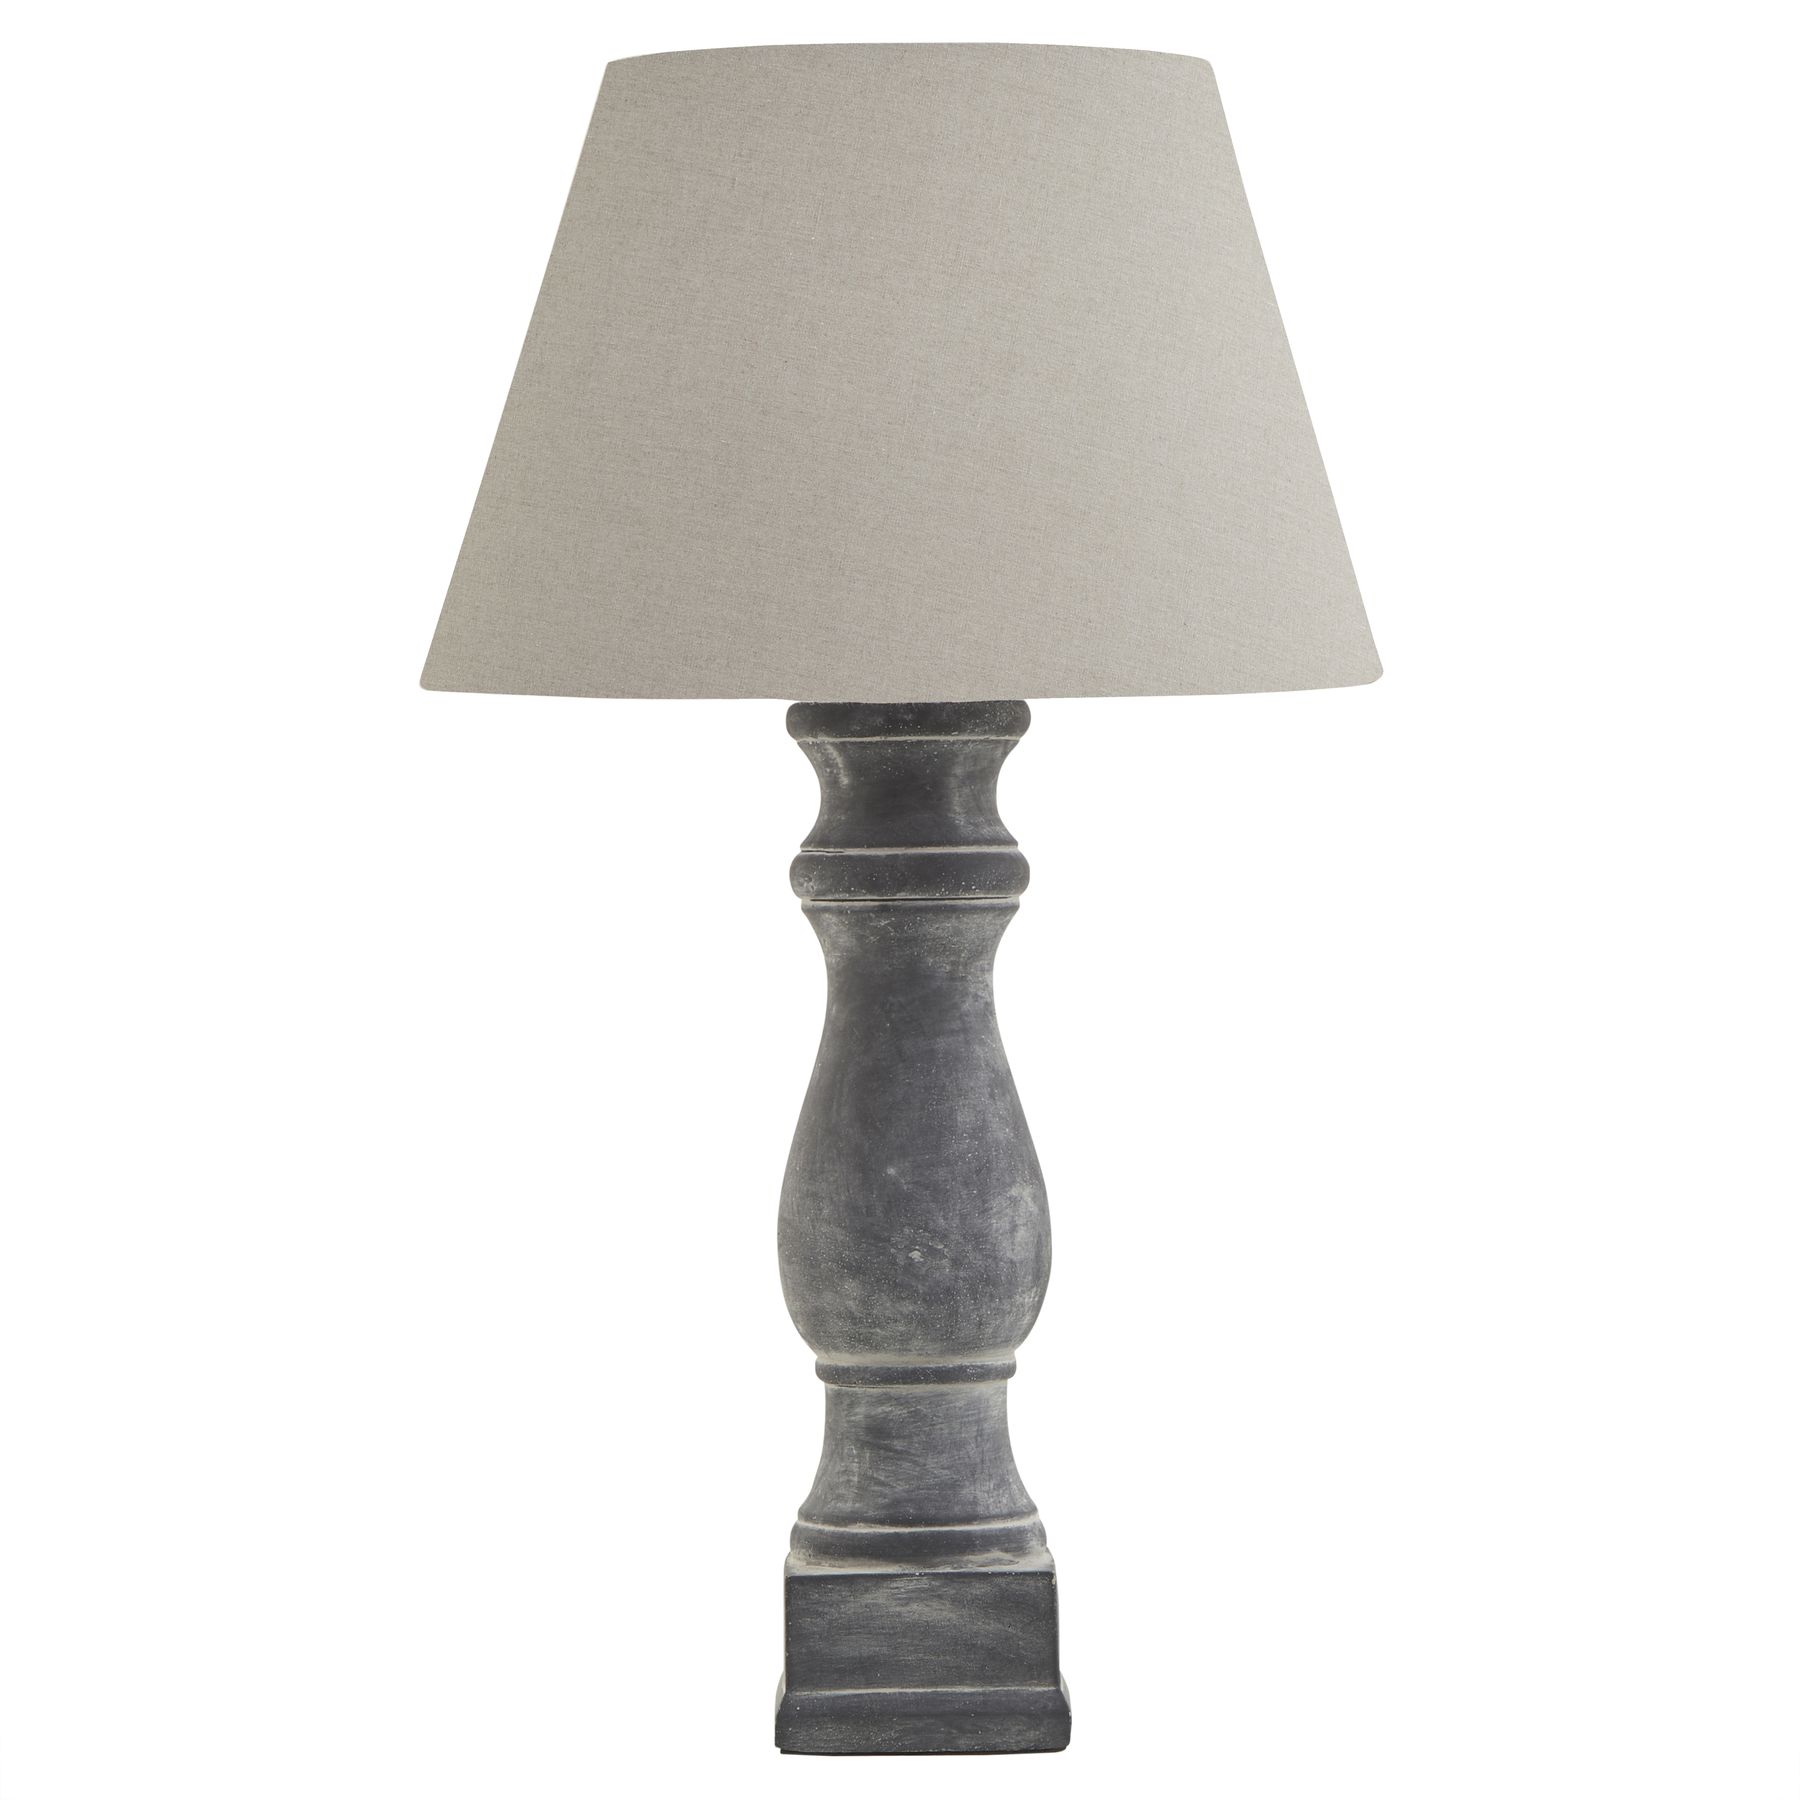 Amalfi Grey Candlestick Table Lamp With Linen Shade - Image 1